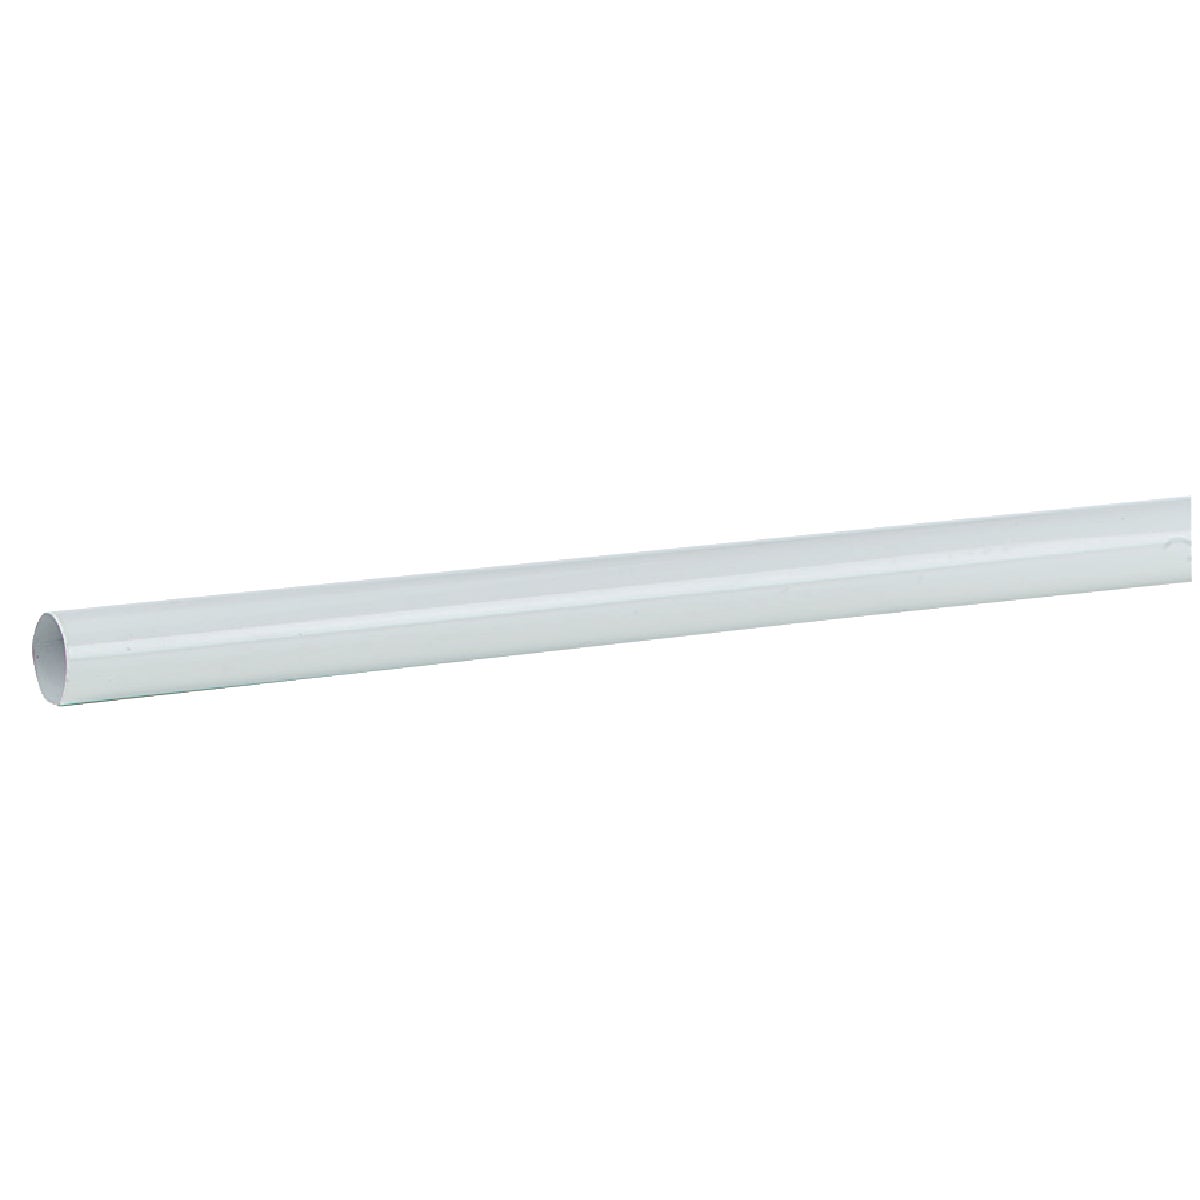 Item 215074, Extra heavy-duty cut-to-length poles. Large 1-1/4 In.